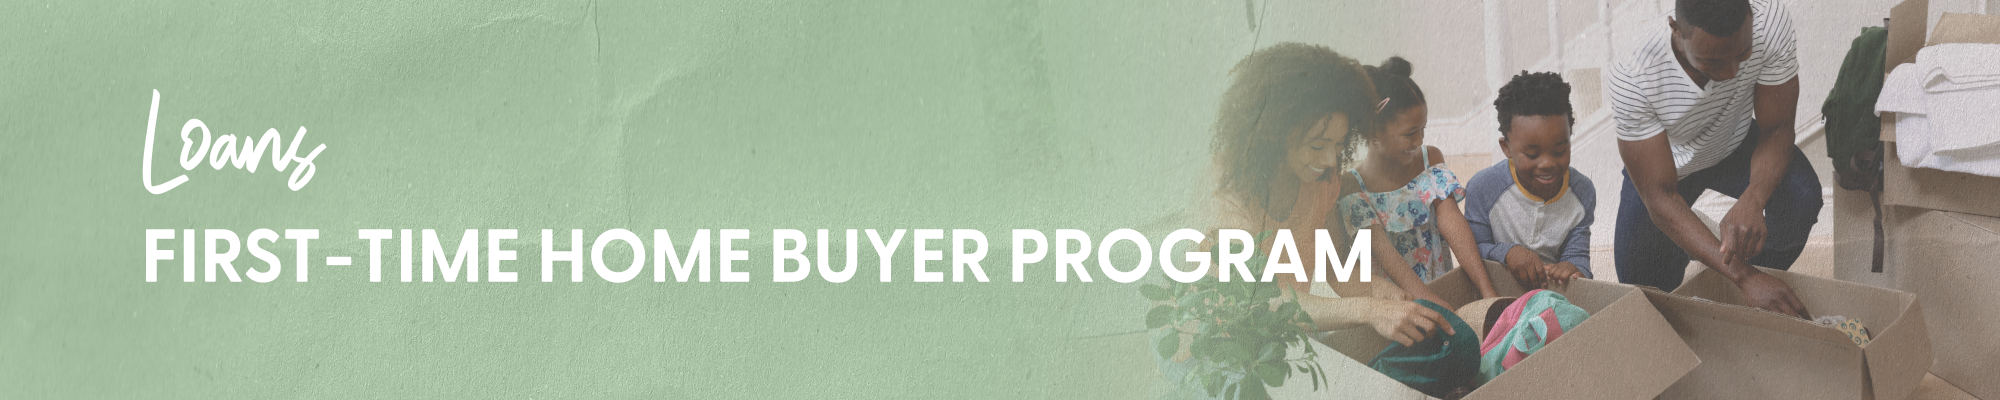 First-Time Home Buyer Program